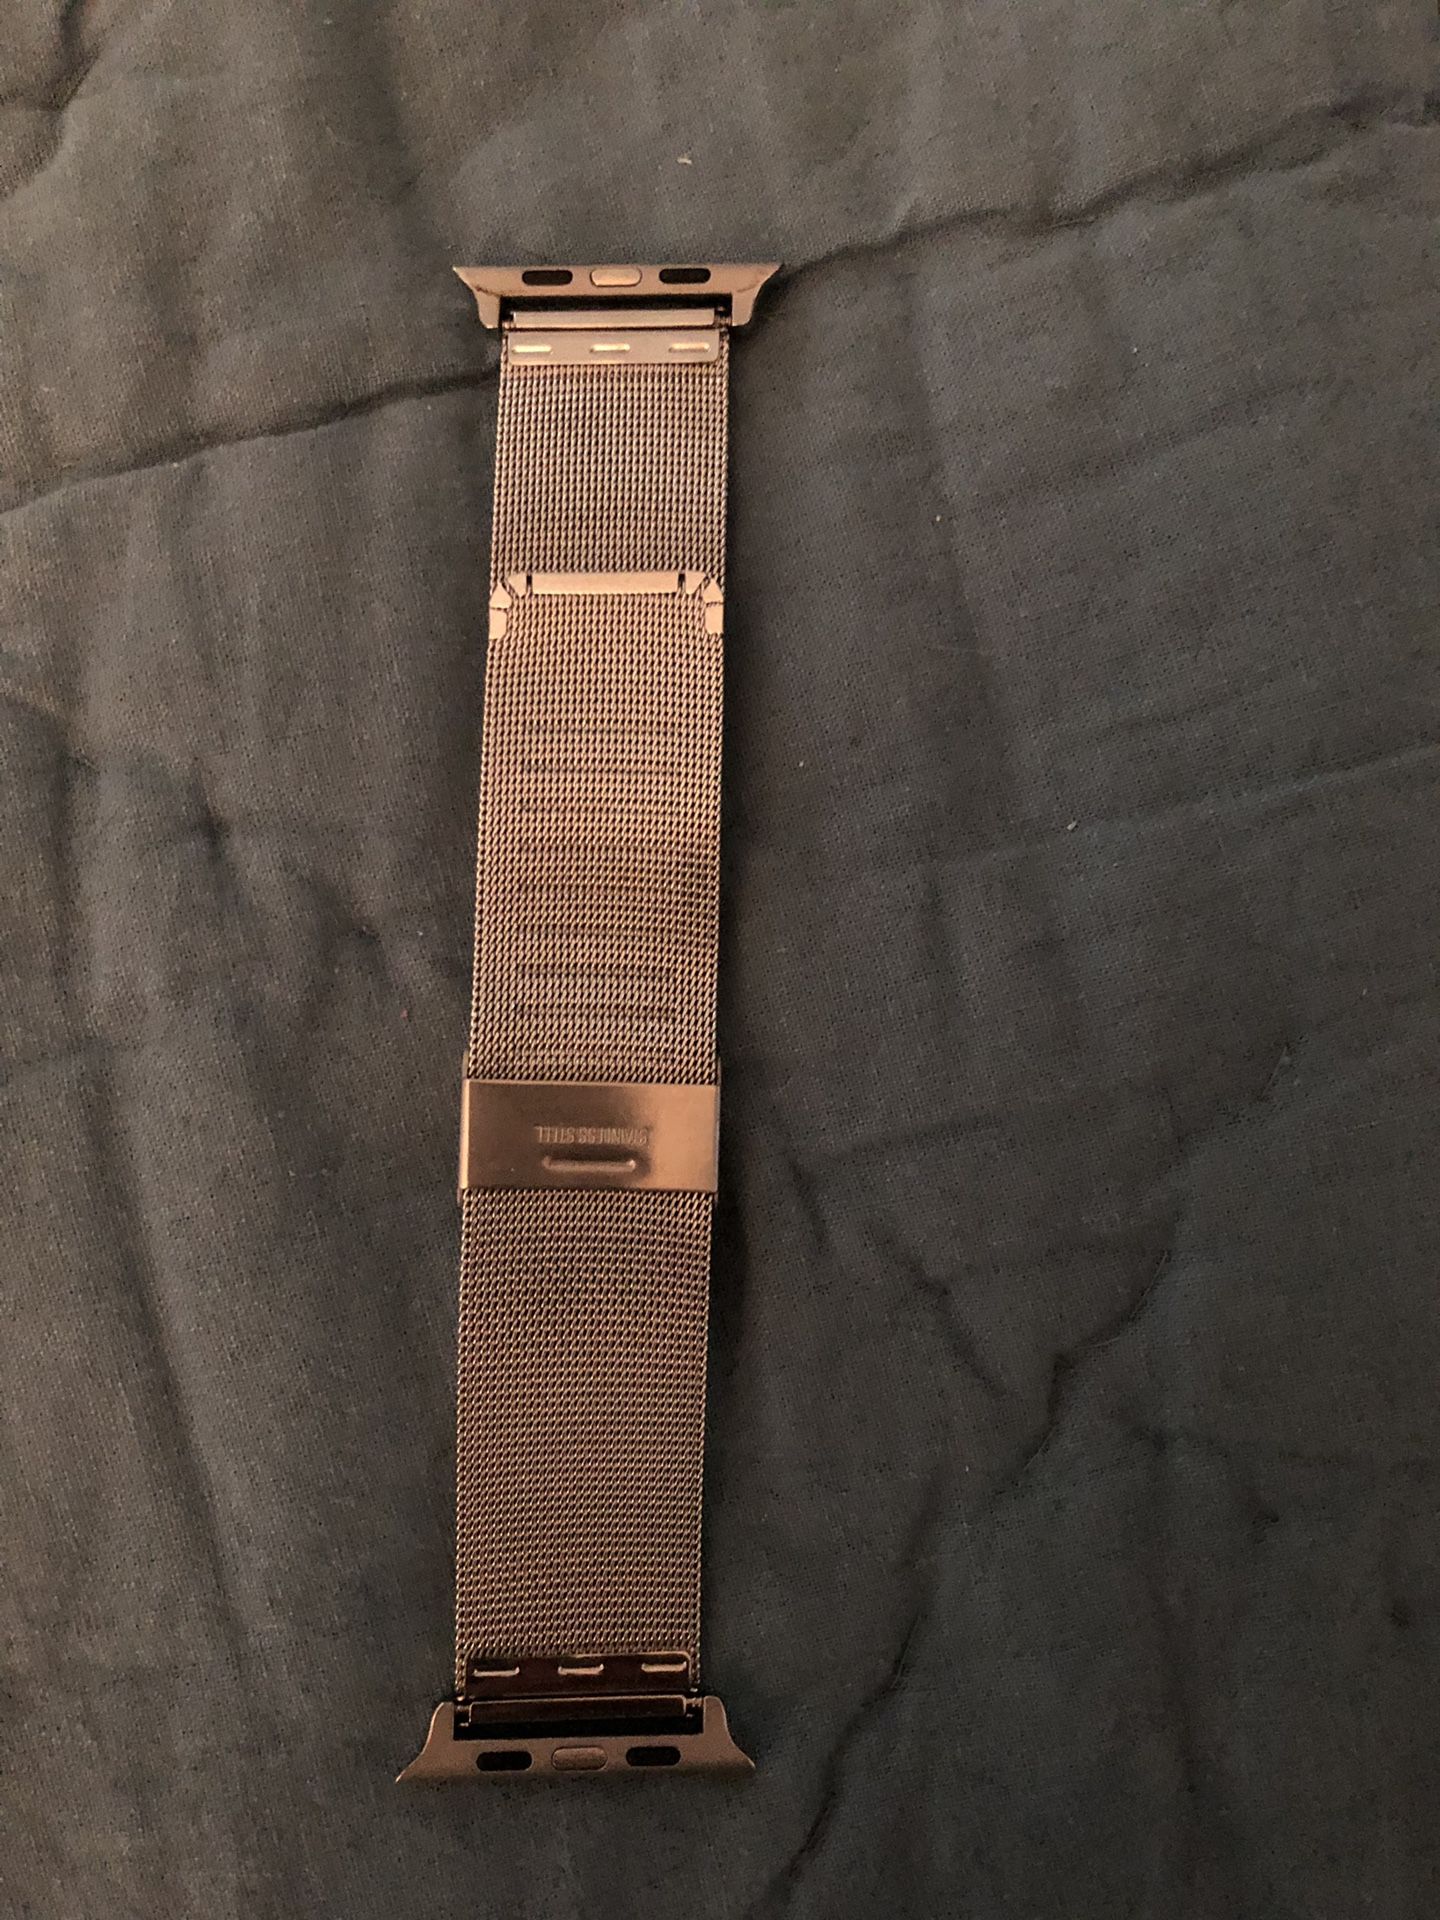 Stainless steel 42mm Apple Watch band